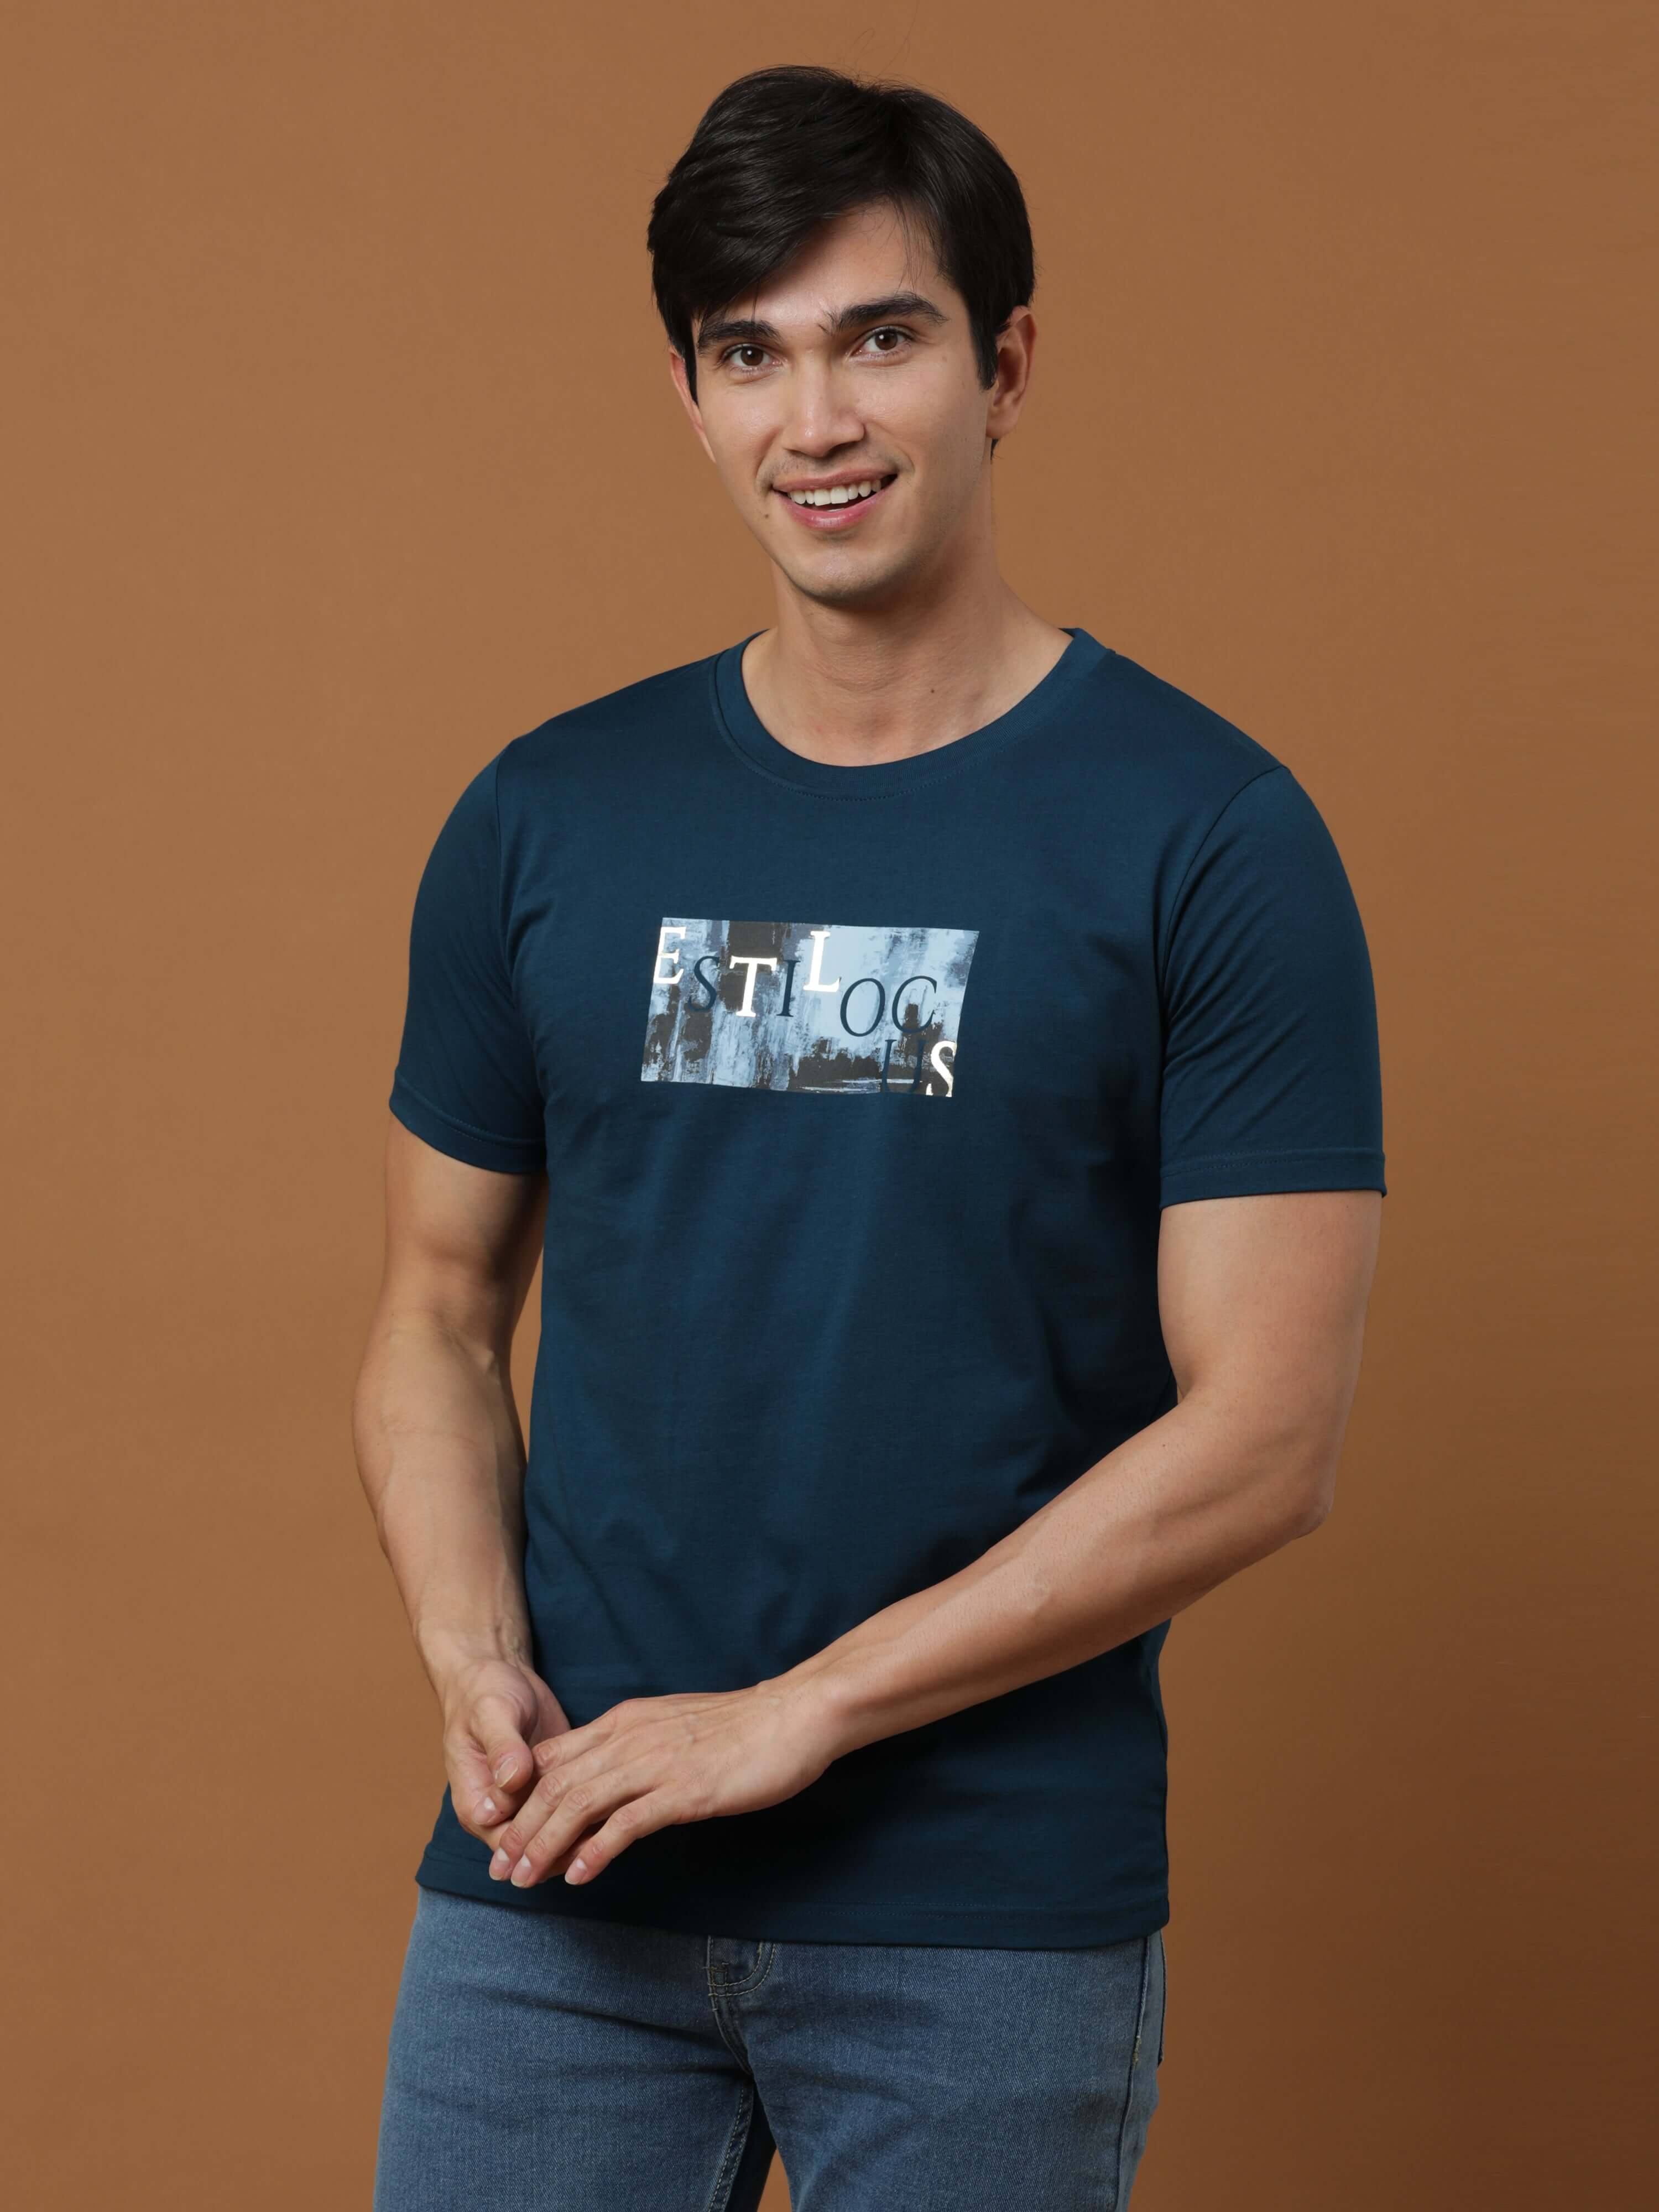 Vintage Teal Printed T Shirt shop online at Estilocus. 100% Cotton Designed and printed on knitted fabric. The fabric is stretchy and lightweight, with a soft skin feel and no wrinkles. Crew neck collar which is smooth on the neck and keeps you comfortabl